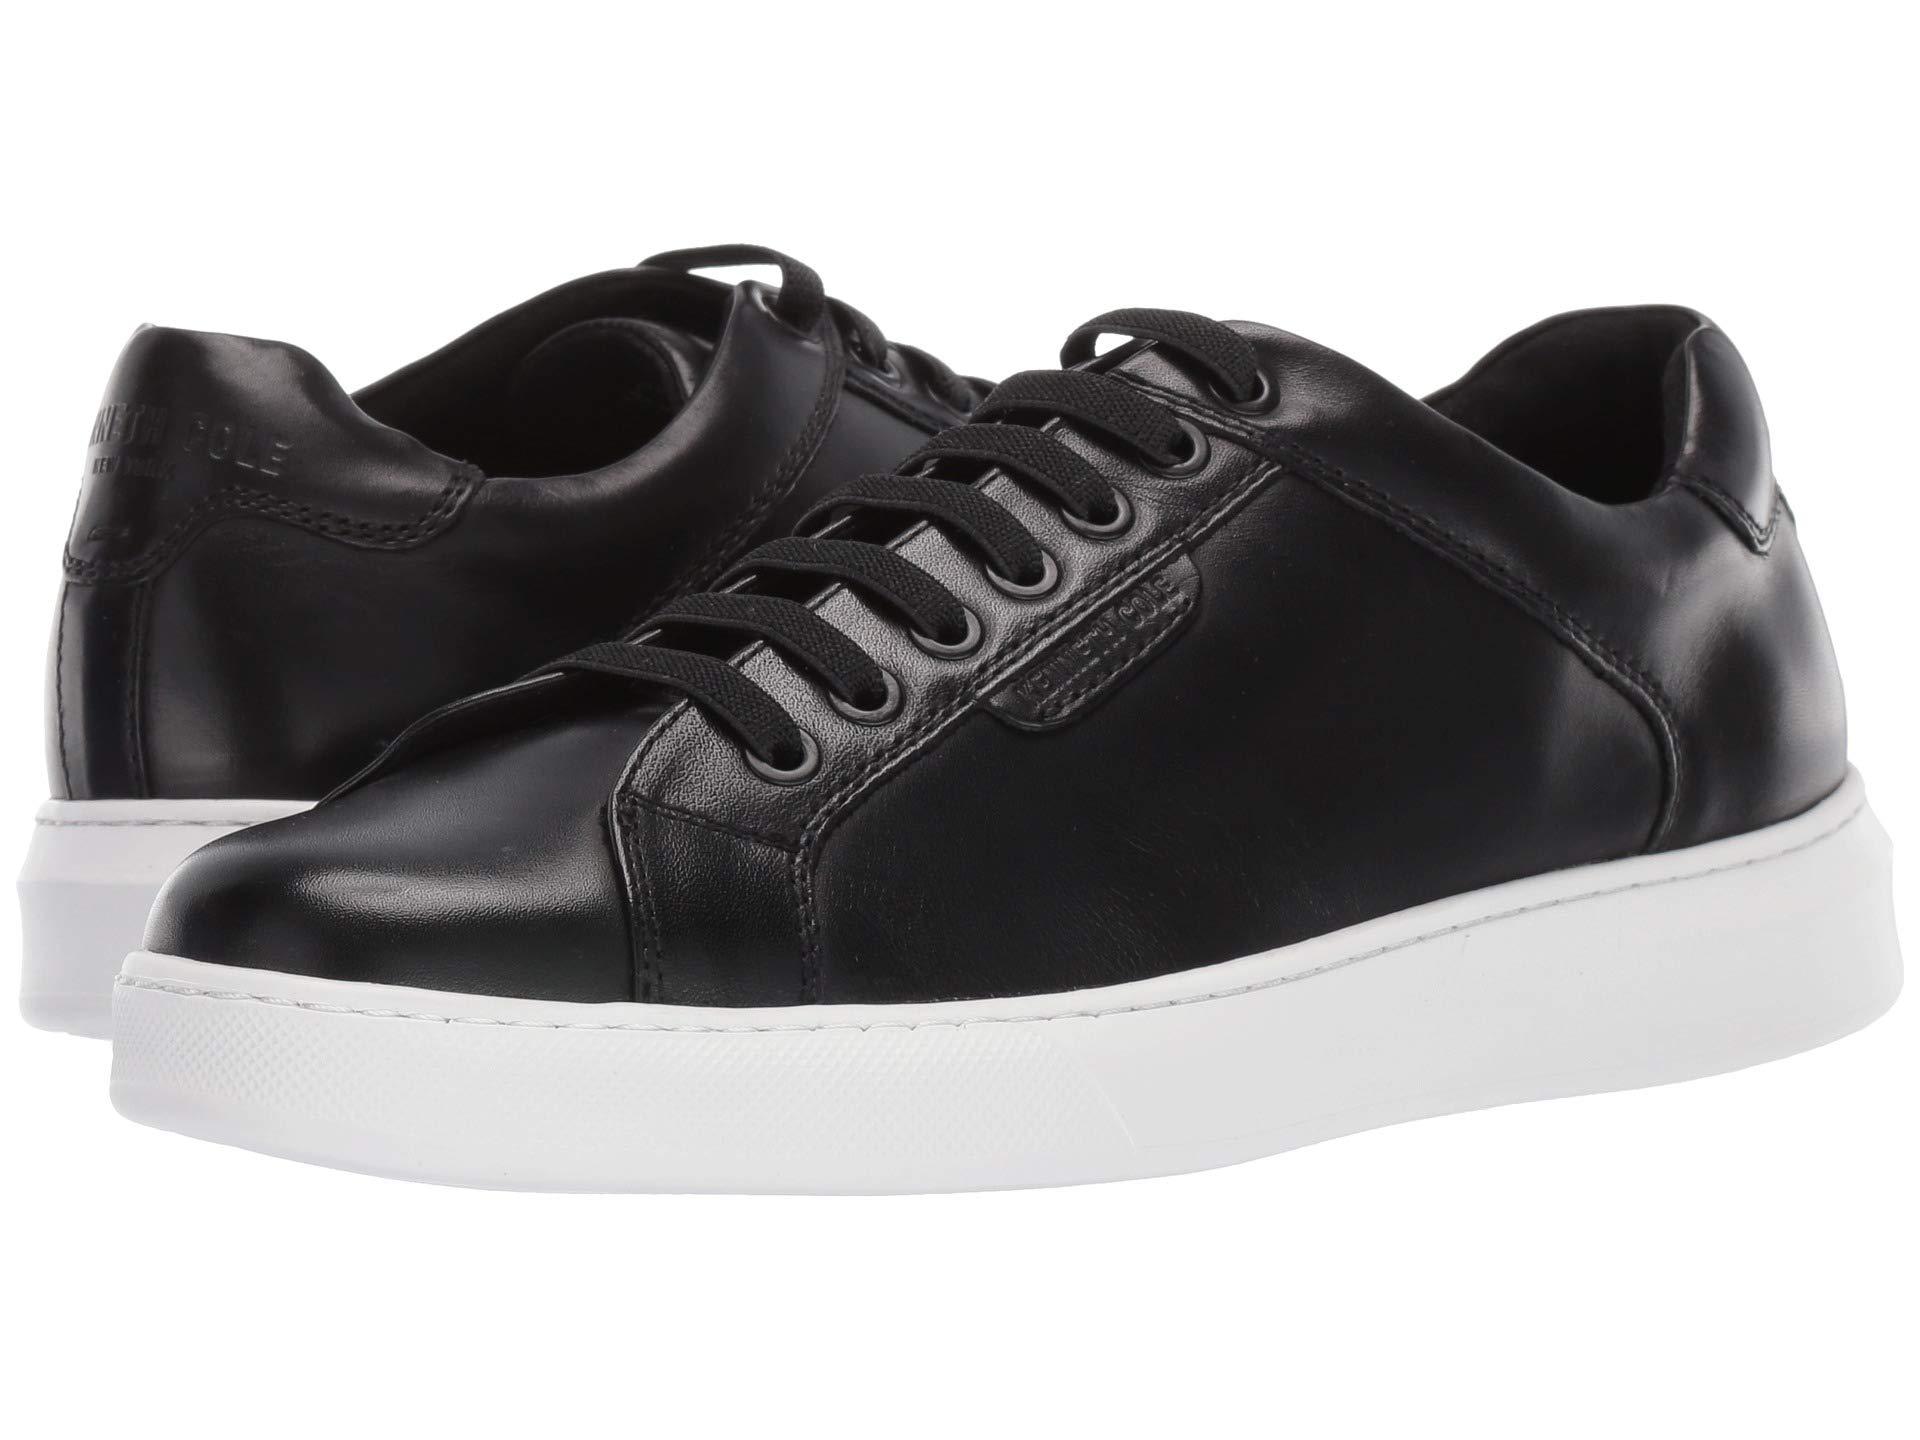 Kenneth Cole Leather Liam Sneaker in Black for Men - Lyst